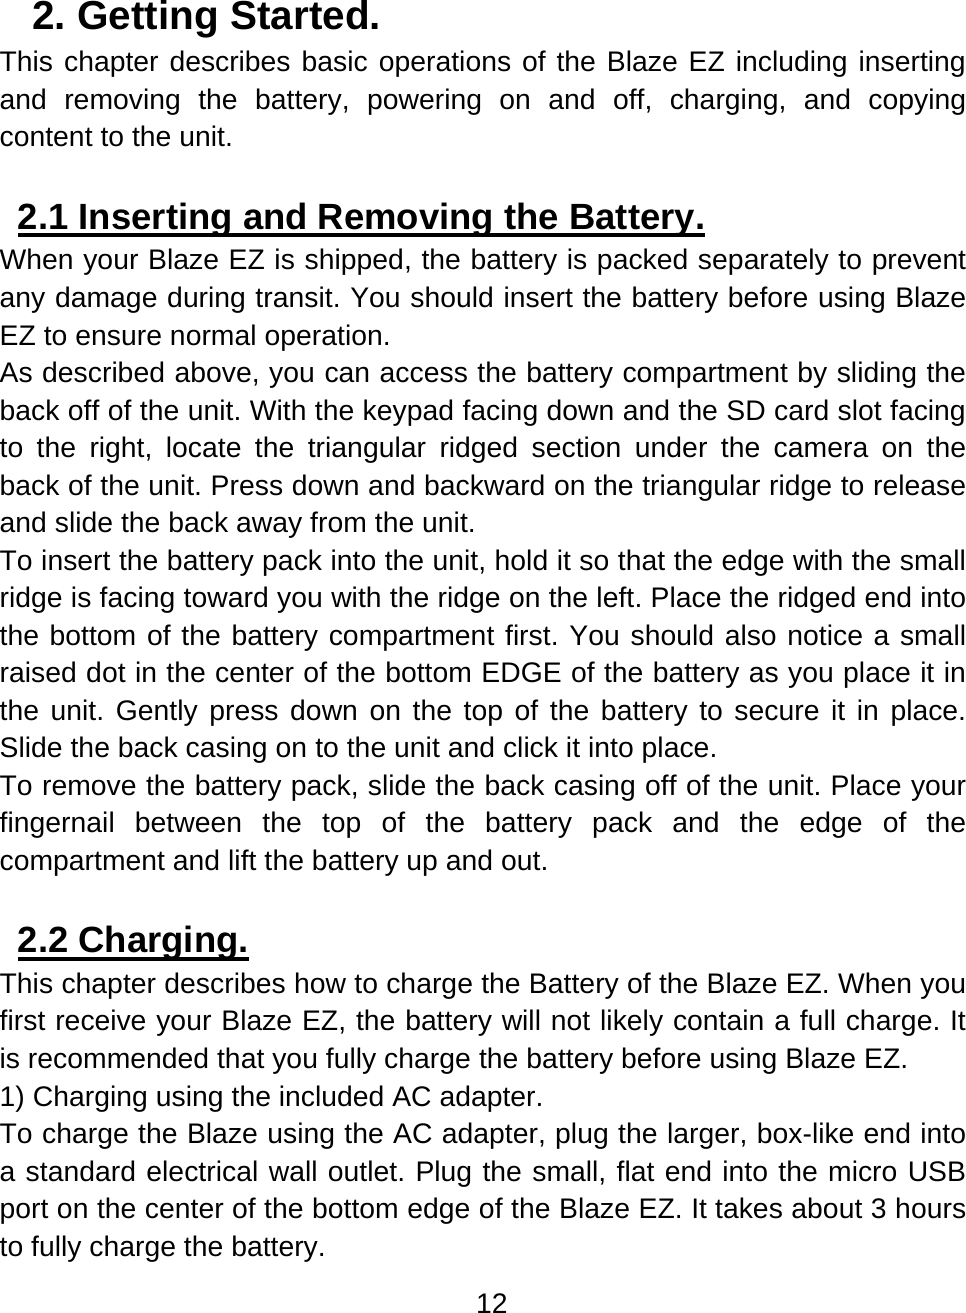 12  2. Getting Started.  This chapter describes basic operations of the Blaze EZ including inserting and removing the battery, powering on and off, charging, and copying content to the unit.  2.1 Inserting and Removing the Battery.  When your Blaze EZ is shipped, the battery is packed separately to prevent any damage during transit. You should insert the battery before using Blaze EZ to ensure normal operation. As described above, you can access the battery compartment by sliding the back off of the unit. With the keypad facing down and the SD card slot facing to the right, locate the triangular ridged section under the camera on the back of the unit. Press down and backward on the triangular ridge to release and slide the back away from the unit. To insert the battery pack into the unit, hold it so that the edge with the small ridge is facing toward you with the ridge on the left. Place the ridged end into the bottom of the battery compartment first. You should also notice a small raised dot in the center of the bottom EDGE of the battery as you place it in the unit. Gently press down on the top of the battery to secure it in place. Slide the back casing on to the unit and click it into place. To remove the battery pack, slide the back casing off of the unit. Place your fingernail between the top of the battery pack and the edge of the compartment and lift the battery up and out.  2.2 Charging.  This chapter describes how to charge the Battery of the Blaze EZ. When you first receive your Blaze EZ, the battery will not likely contain a full charge. It is recommended that you fully charge the battery before using Blaze EZ. 1) Charging using the included AC adapter.  To charge the Blaze using the AC adapter, plug the larger, box-like end into a standard electrical wall outlet. Plug the small, flat end into the micro USB port on the center of the bottom edge of the Blaze EZ. It takes about 3 hours to fully charge the battery. 